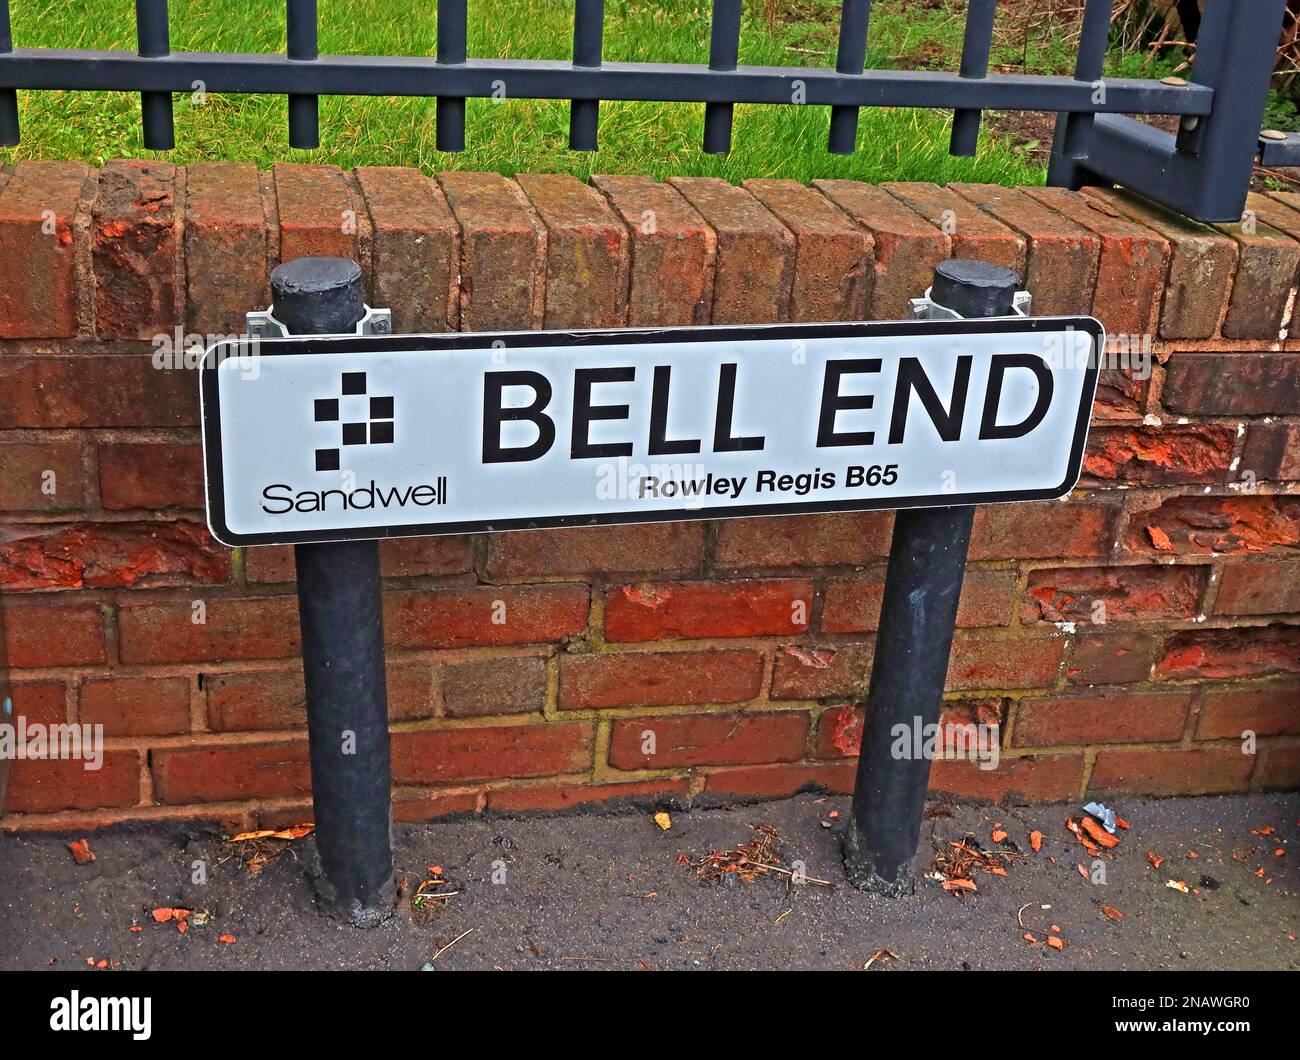 Bell End, road sign at Rowley Village, Rowley Regis, Sandwell, West Midlands, England, UK, B65 9LX Stock Photo